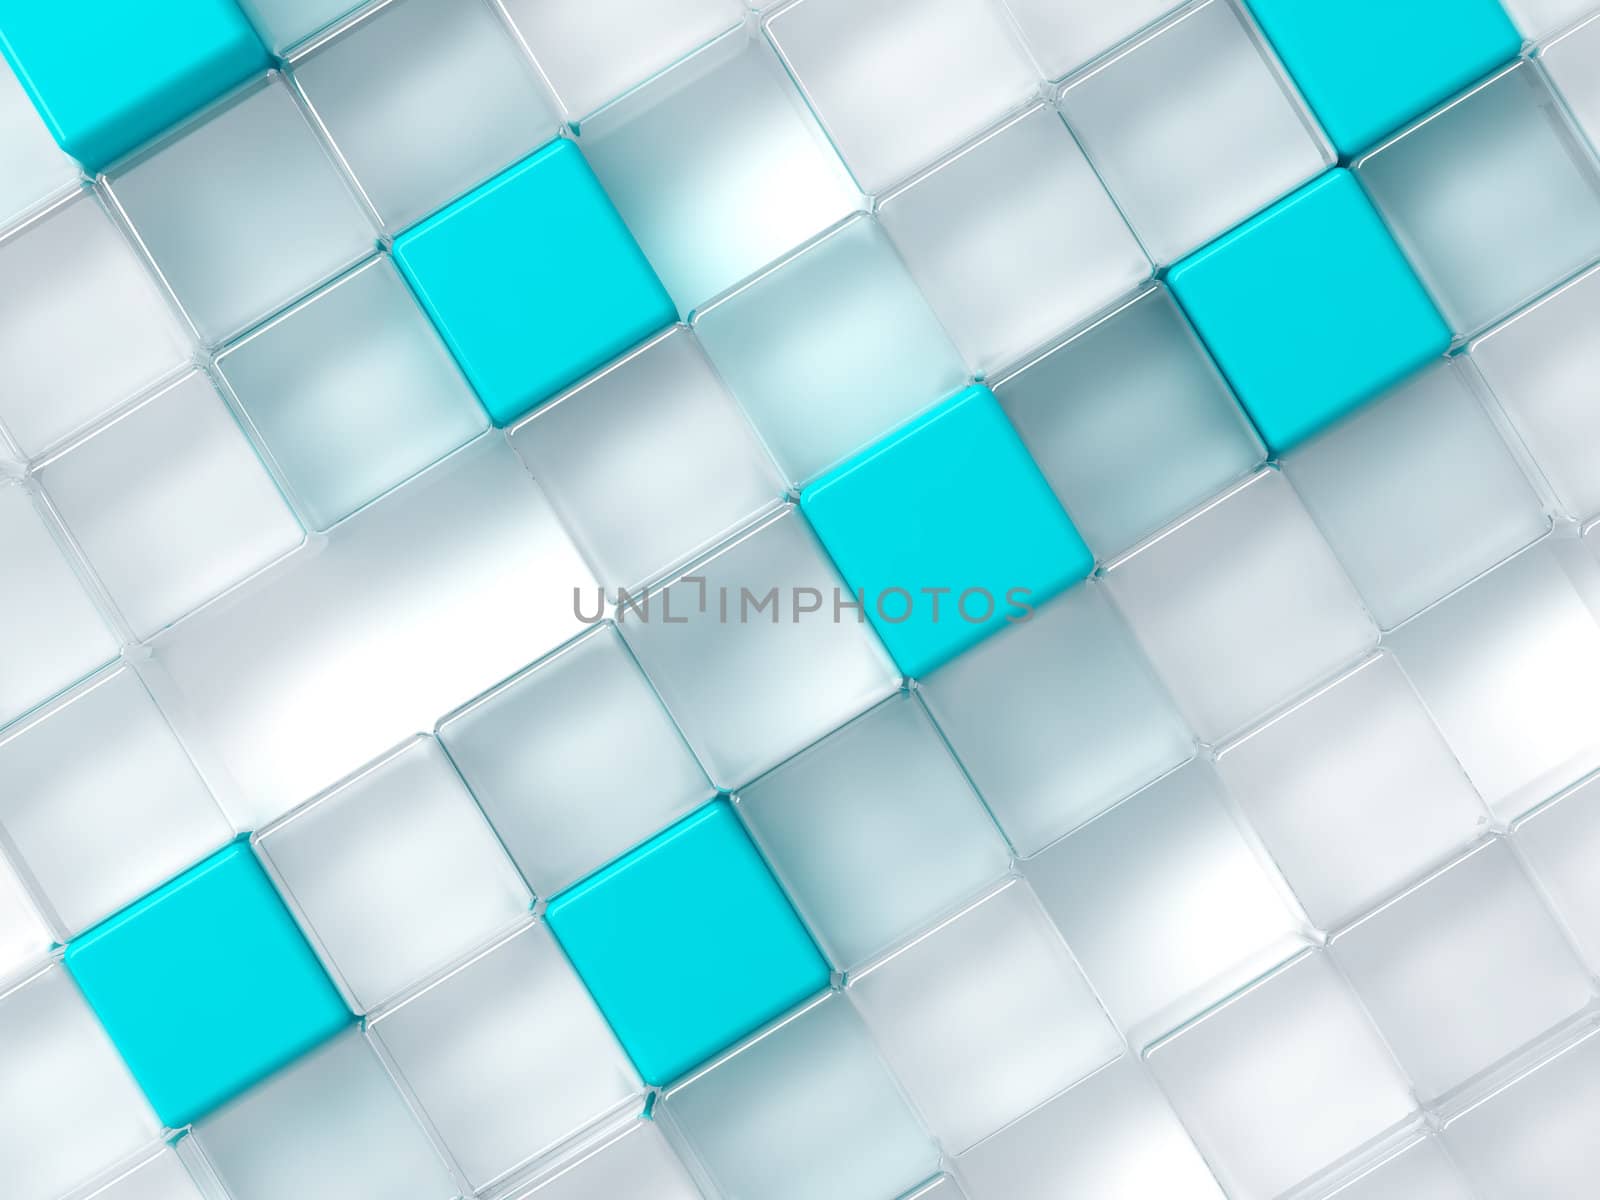 Abstract background consisting of white and blue plastic cubes by Serp